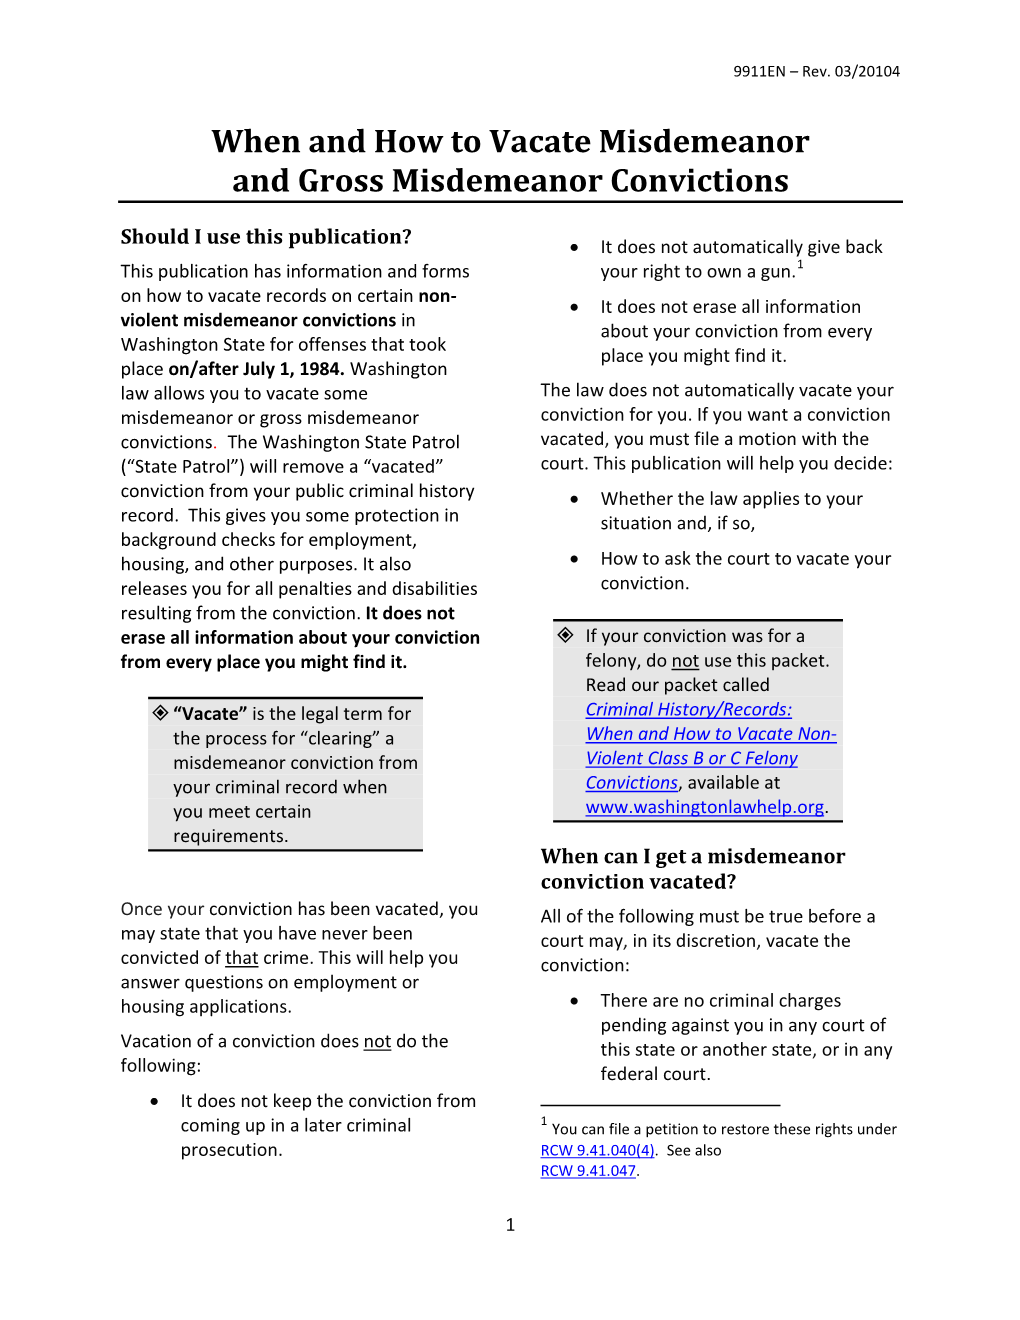 When and How to Vacate Misdemeanor and Gross Misdemeanor Convictions